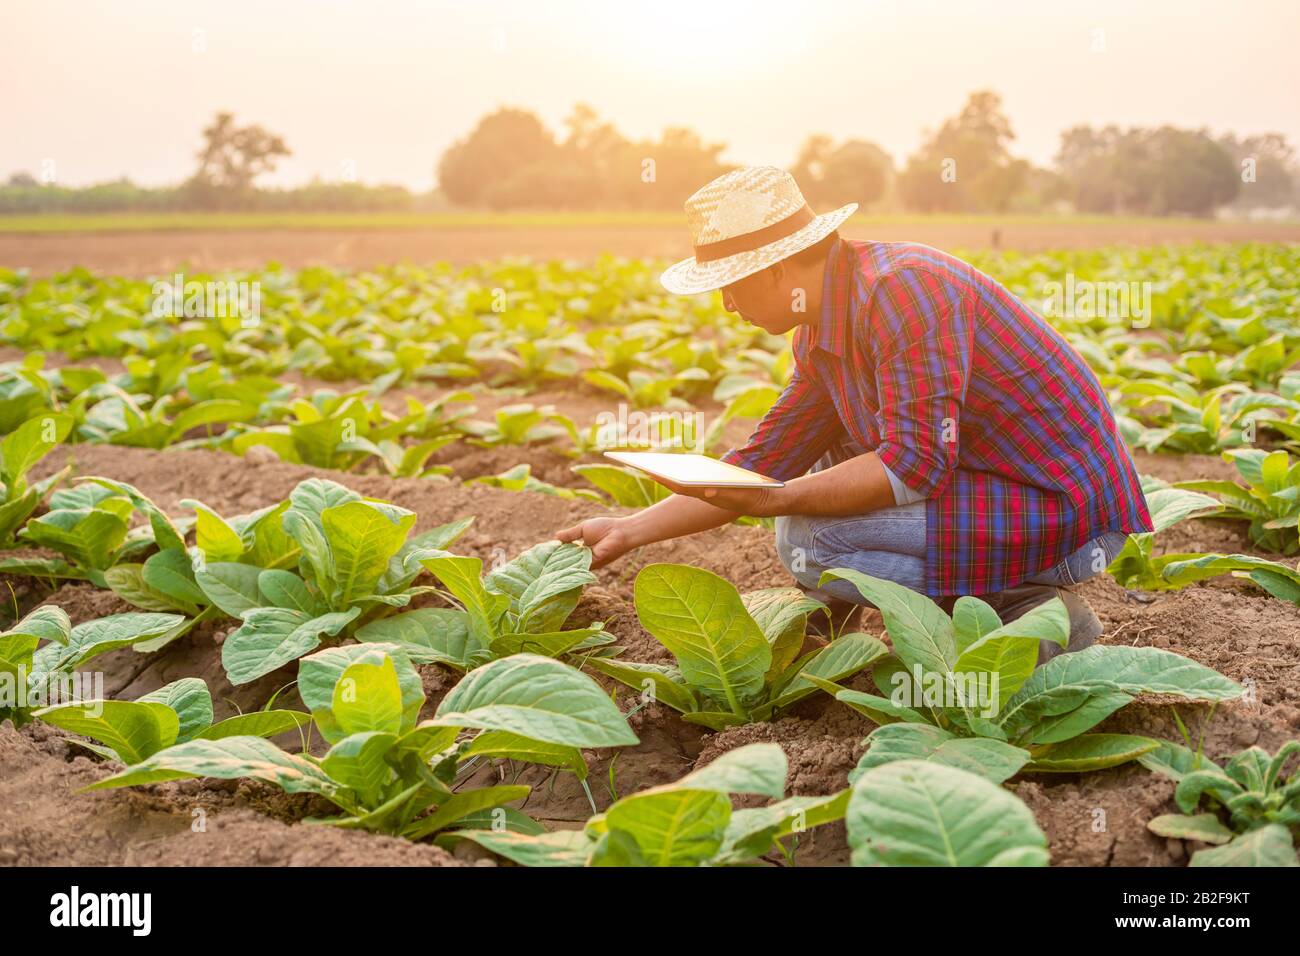 Asian young farmer or academic working in the field of tobacco tree. Research or checking the quality after planting tobacco concept Stock Photo